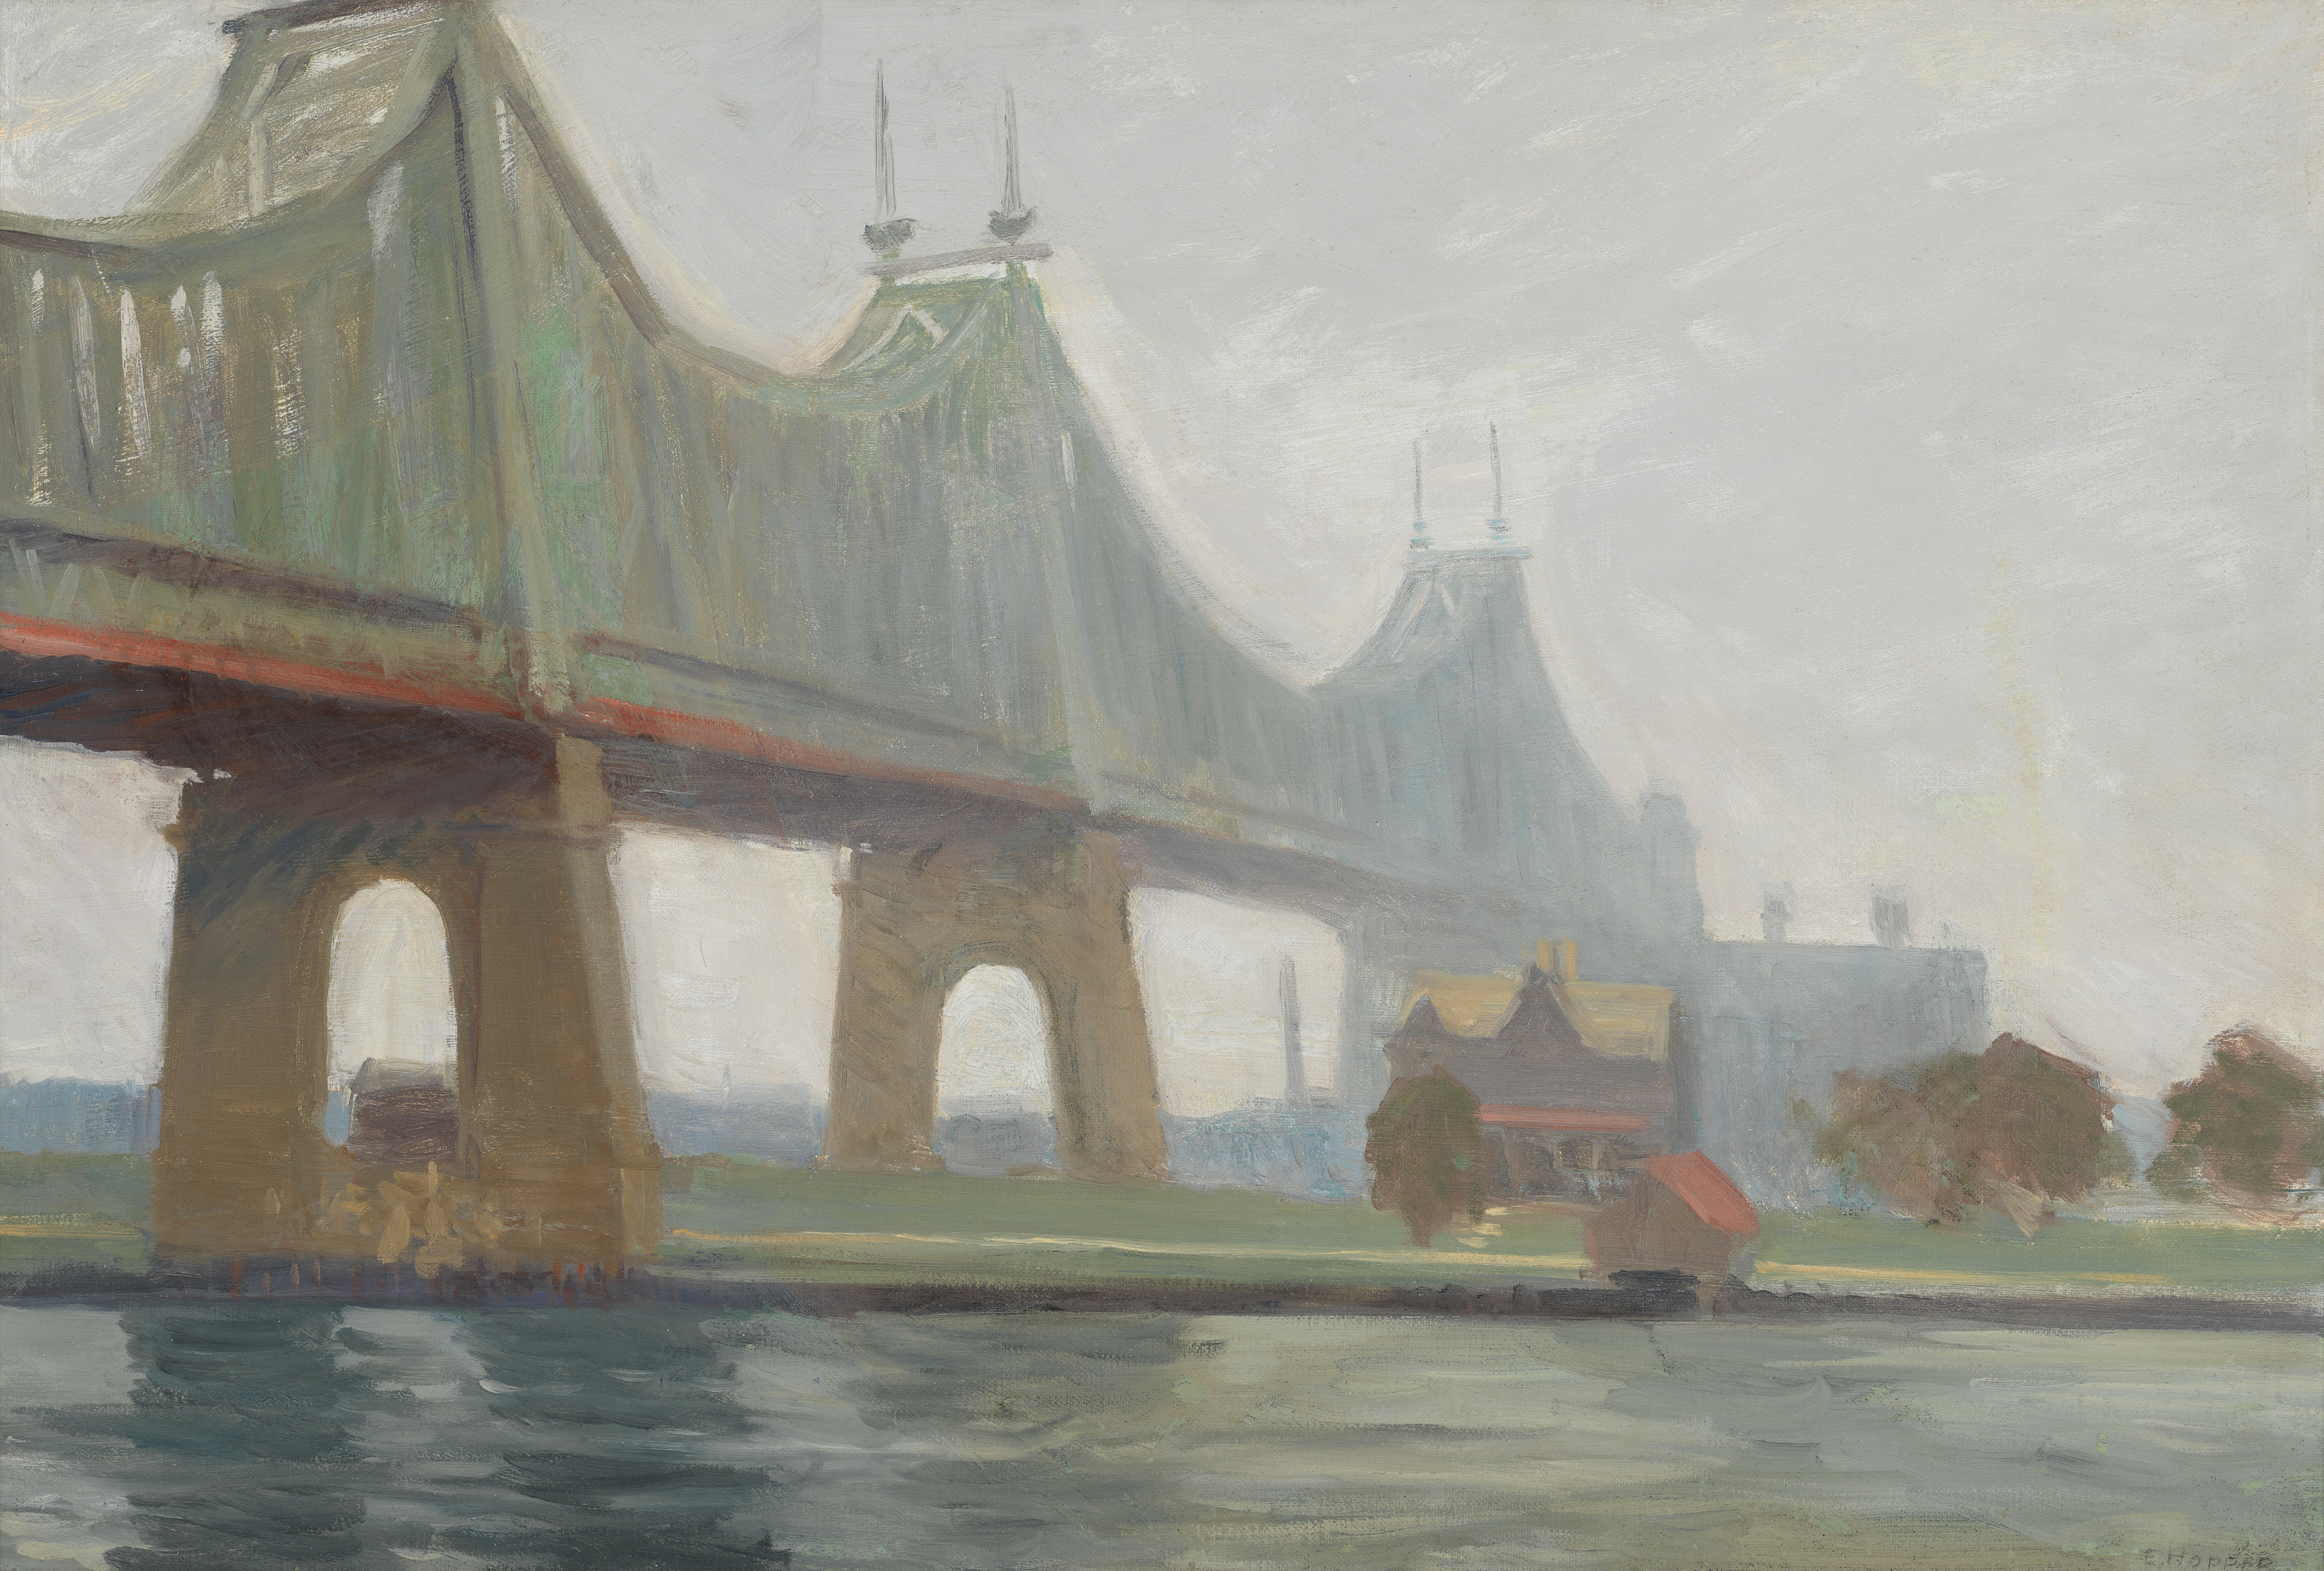 Edward Hopper, Queensborough Bridge, 1913. Oil on canvas, 25 7/8 × 38 1/8 in. (65.7 × 96.8 cm). Whitney Museum of American Art, New York; Josephine N. Hopper Bequest 70.1184. © 2022 Heirs of Josephine N. Hopper/Licensed by Artists Rights Society (ARS), New York